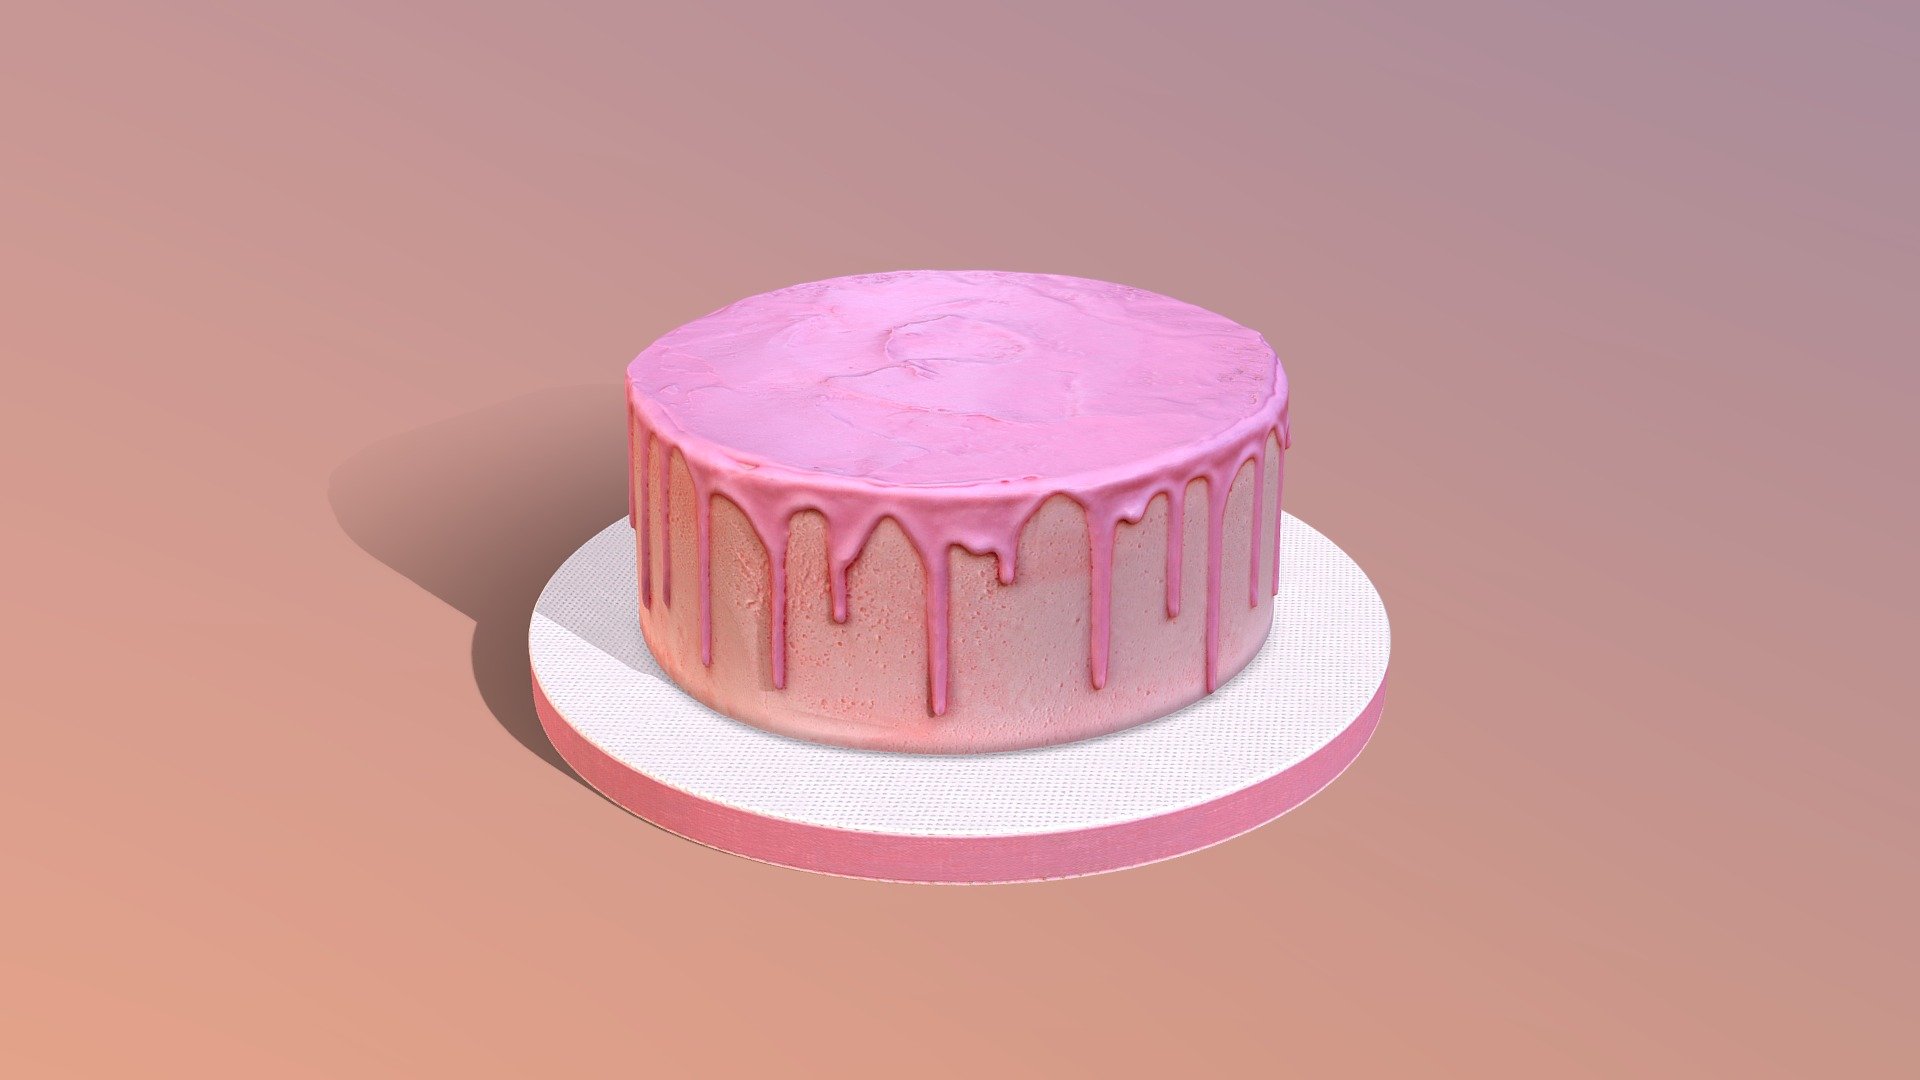 This Plain Pink Drip Cake model was created using photogrammetry which is made by CAKESBURG Premium Cake Shop in the UK. You can purchase real cake from this link: https://cakesburg.co.uk/products/naked-drip-cake-with-personalised-glitter-cardstock-topper?_pos=17&amp;_sid=830fc62ab&amp;_ss=r

Textures 4096*4096px PBR photoscan-based materials Base Color, Normal Map, Roughness) - Plain Pink Drip Cake - Buy Royalty Free 3D model by Cakesburg Premium 3D Cake Shop (@Viscom_Cakesburg) 3d model